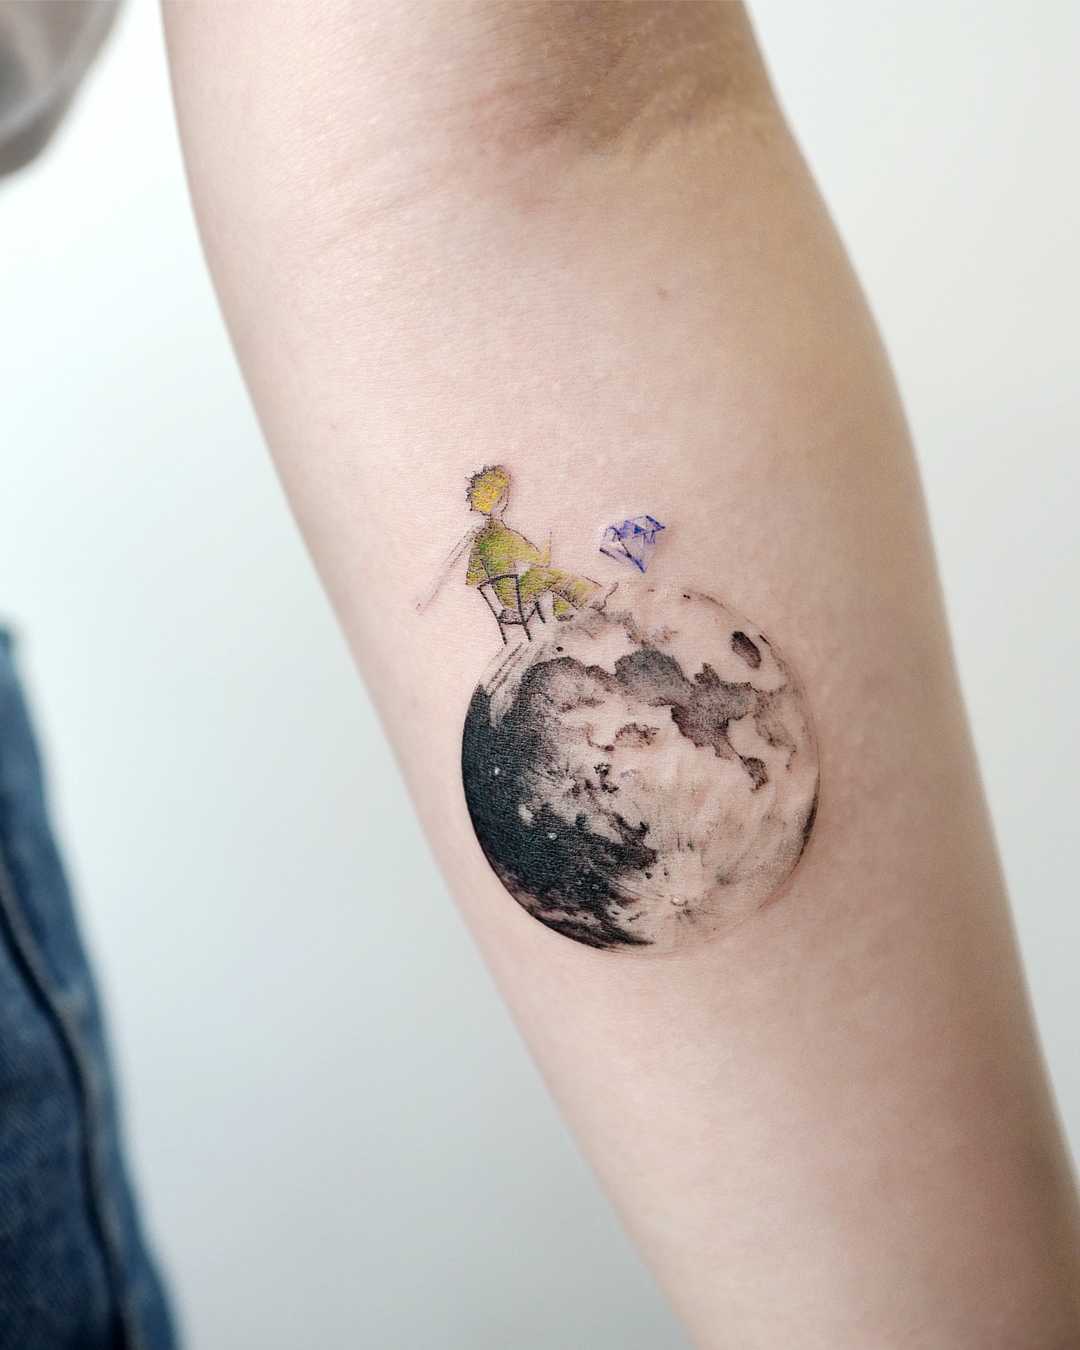 The Little Prince tattoo by Studio Bysol